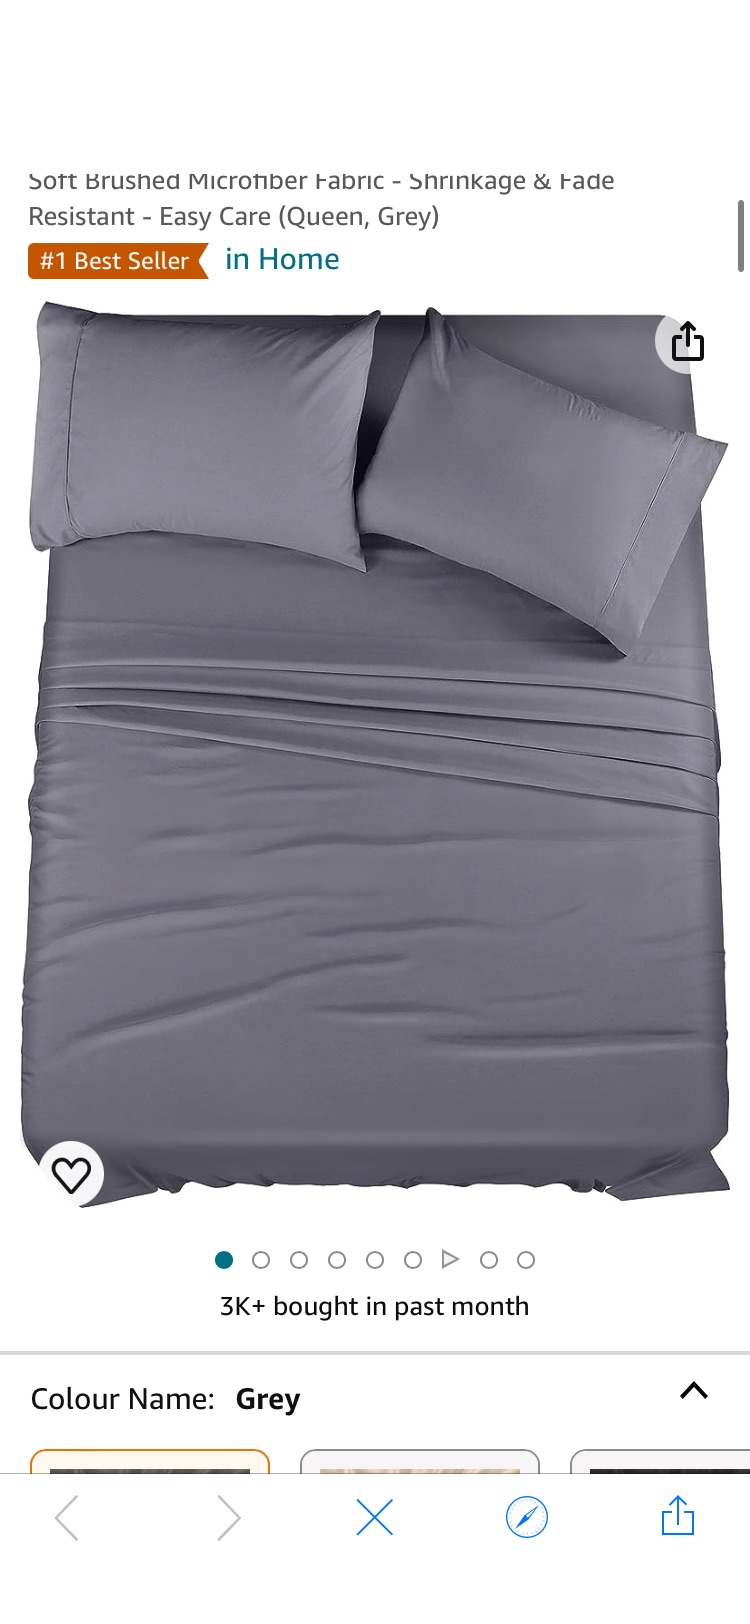 Utopia Bedding Bed Sheet Set - 4 Piece Queen Bedding - Soft Brushed Microfiber Fabric - Shrinkage & Fade Resistant - Easy Care (Queen, Grey) : Amazon.ca: Home